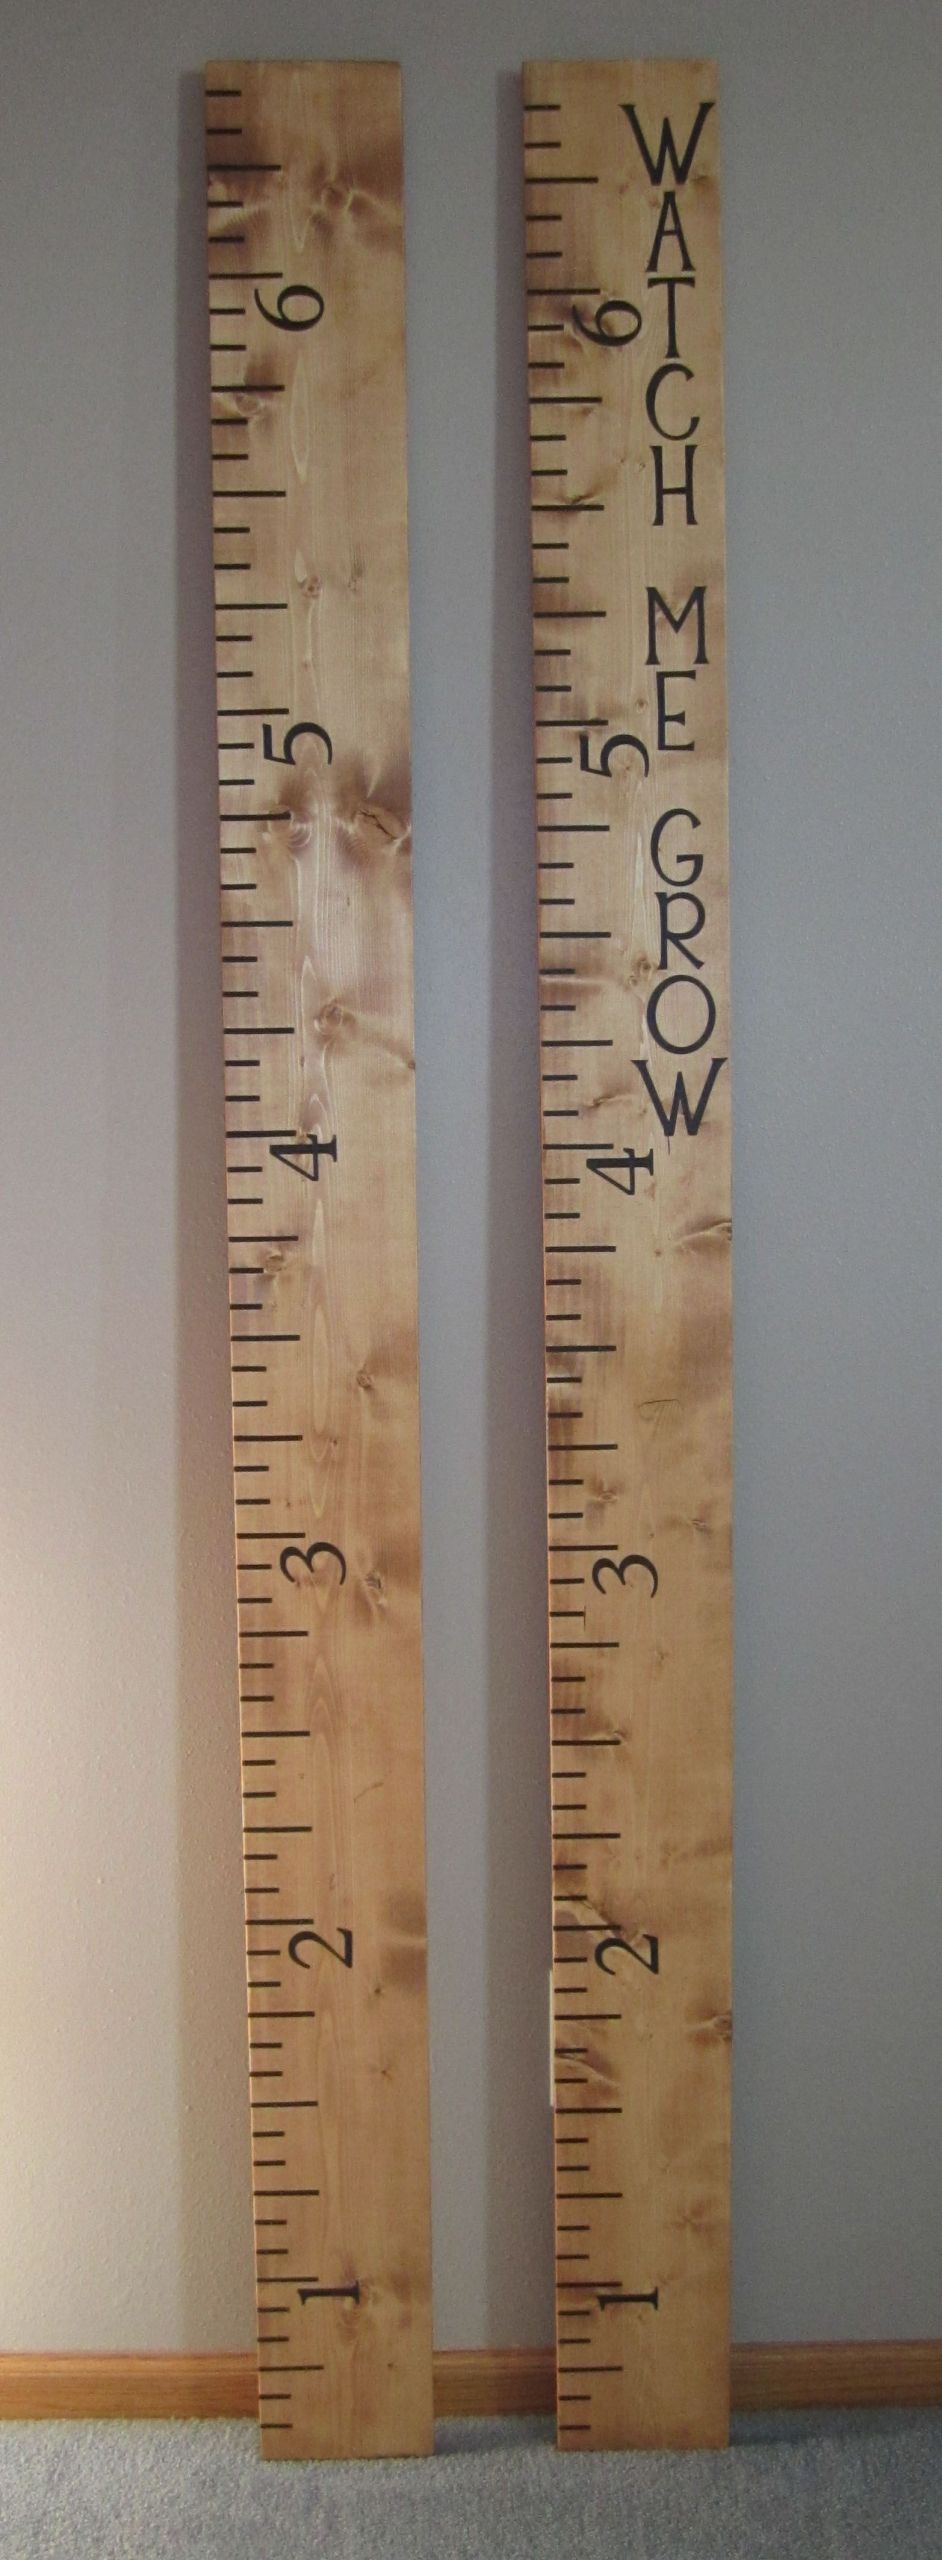 DIY Wooden Growth Chart
 Wooden Growth Chart DIY t and craft ideas